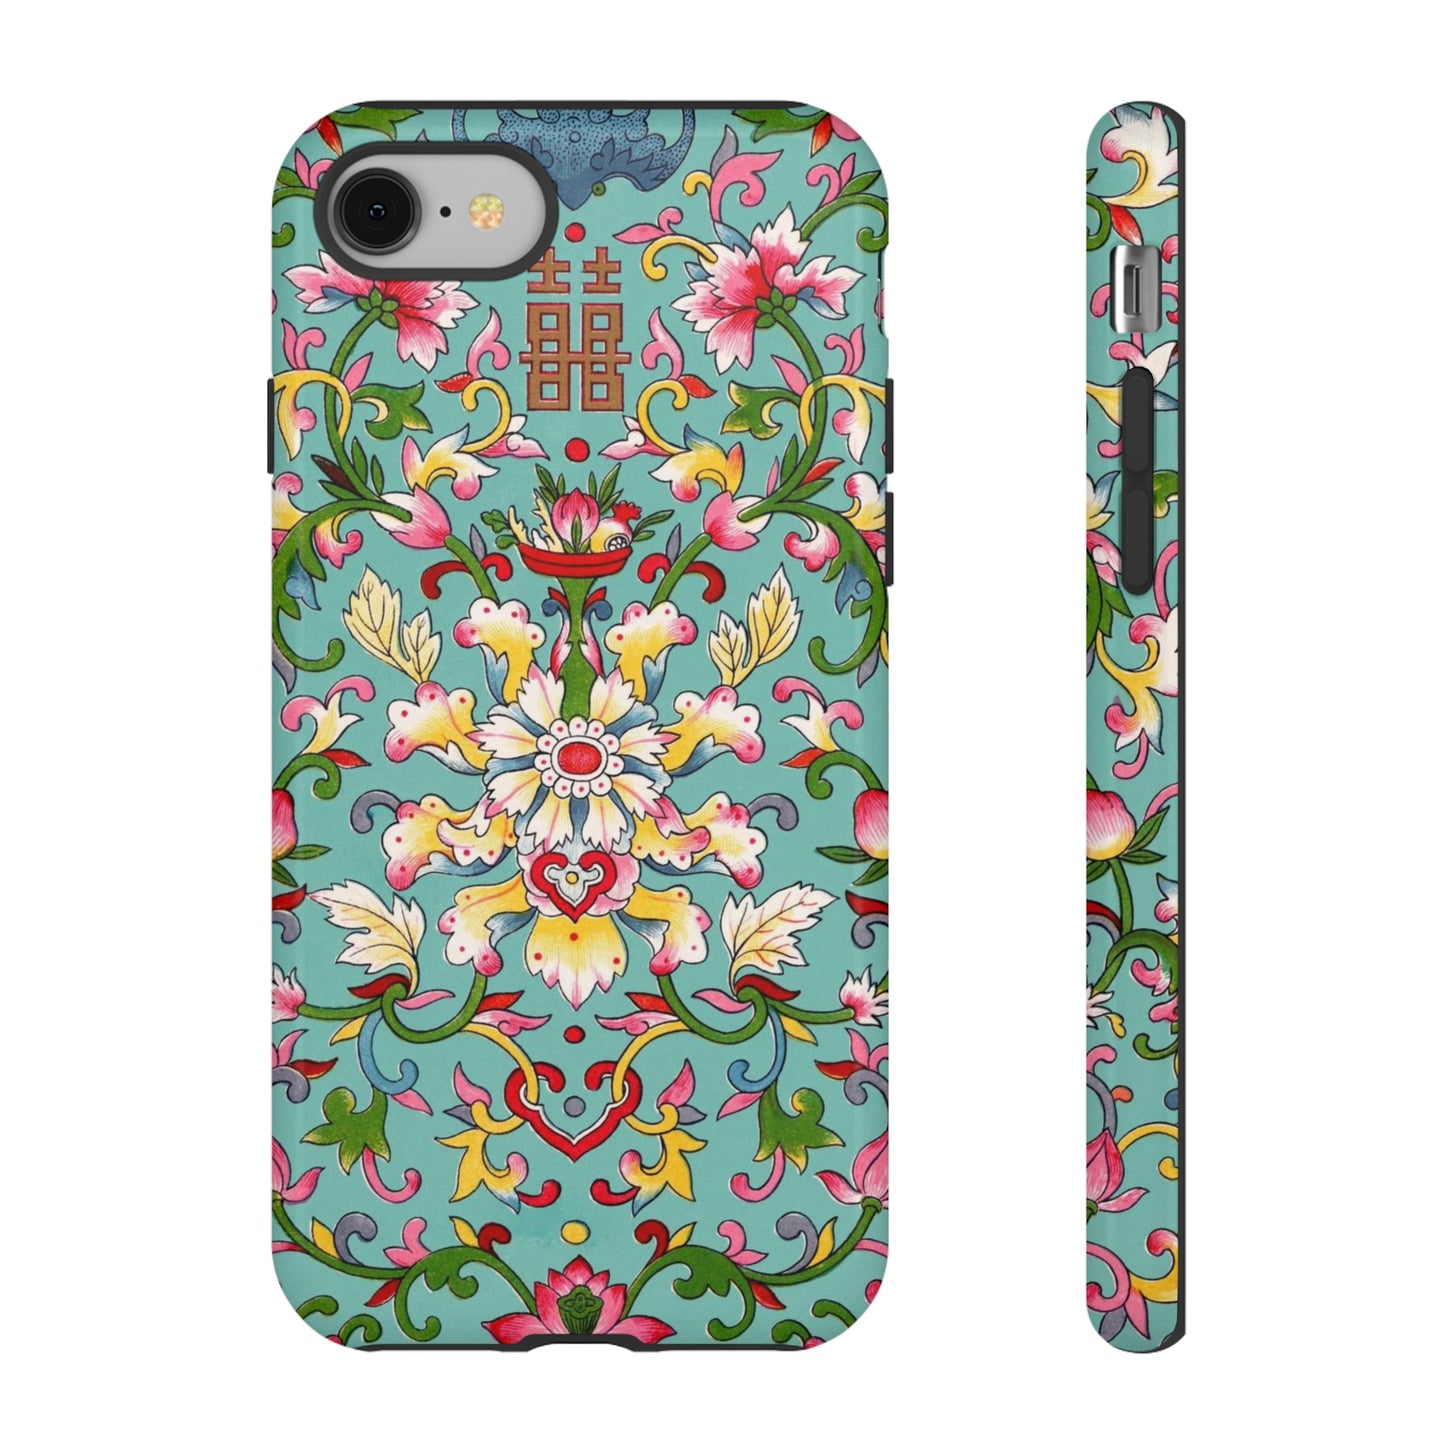 Floral Family Phone Case - BRYKNOLO LLC Phone Case iPhone 8 / Glossy